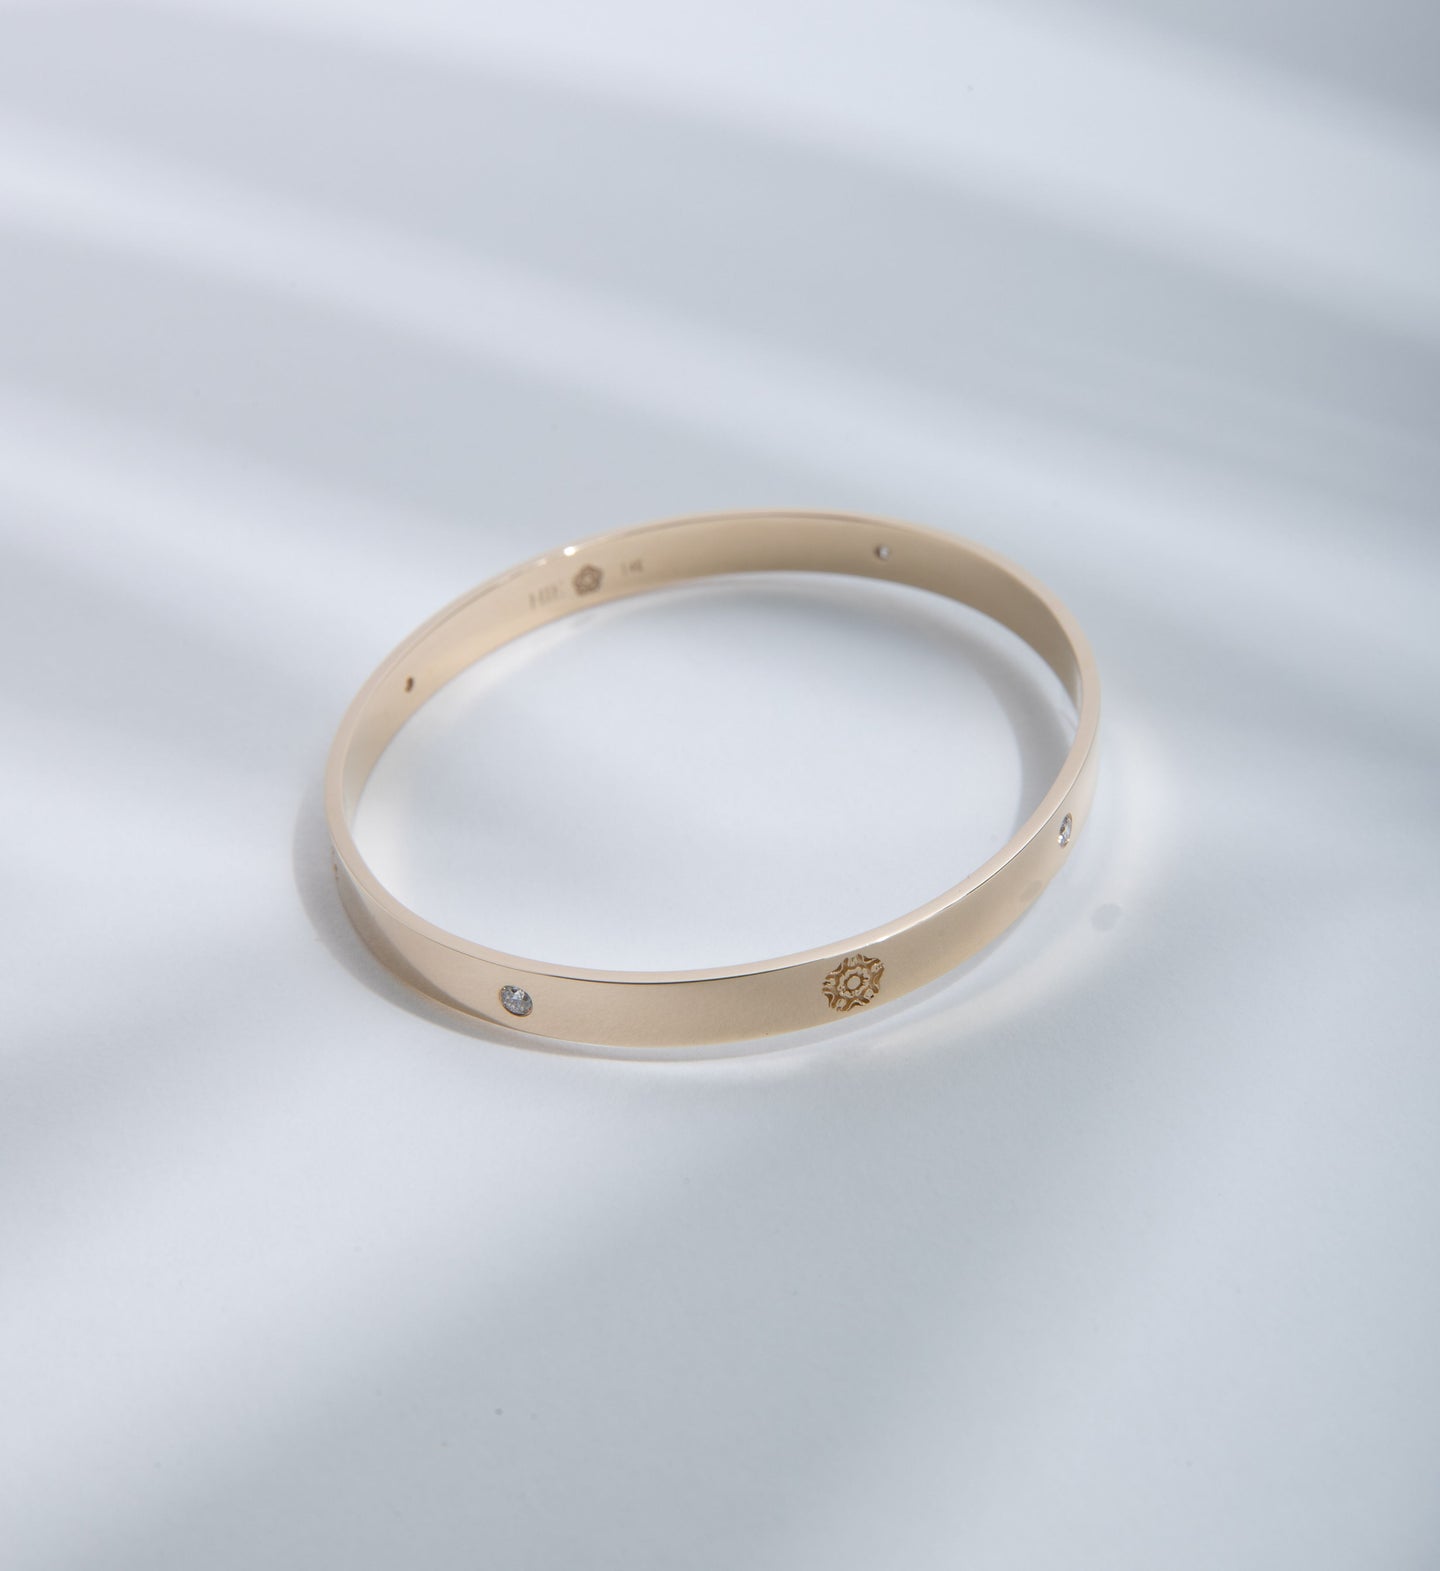 Hie Signature bangle bracelet in gold with logo engraving and diamond details